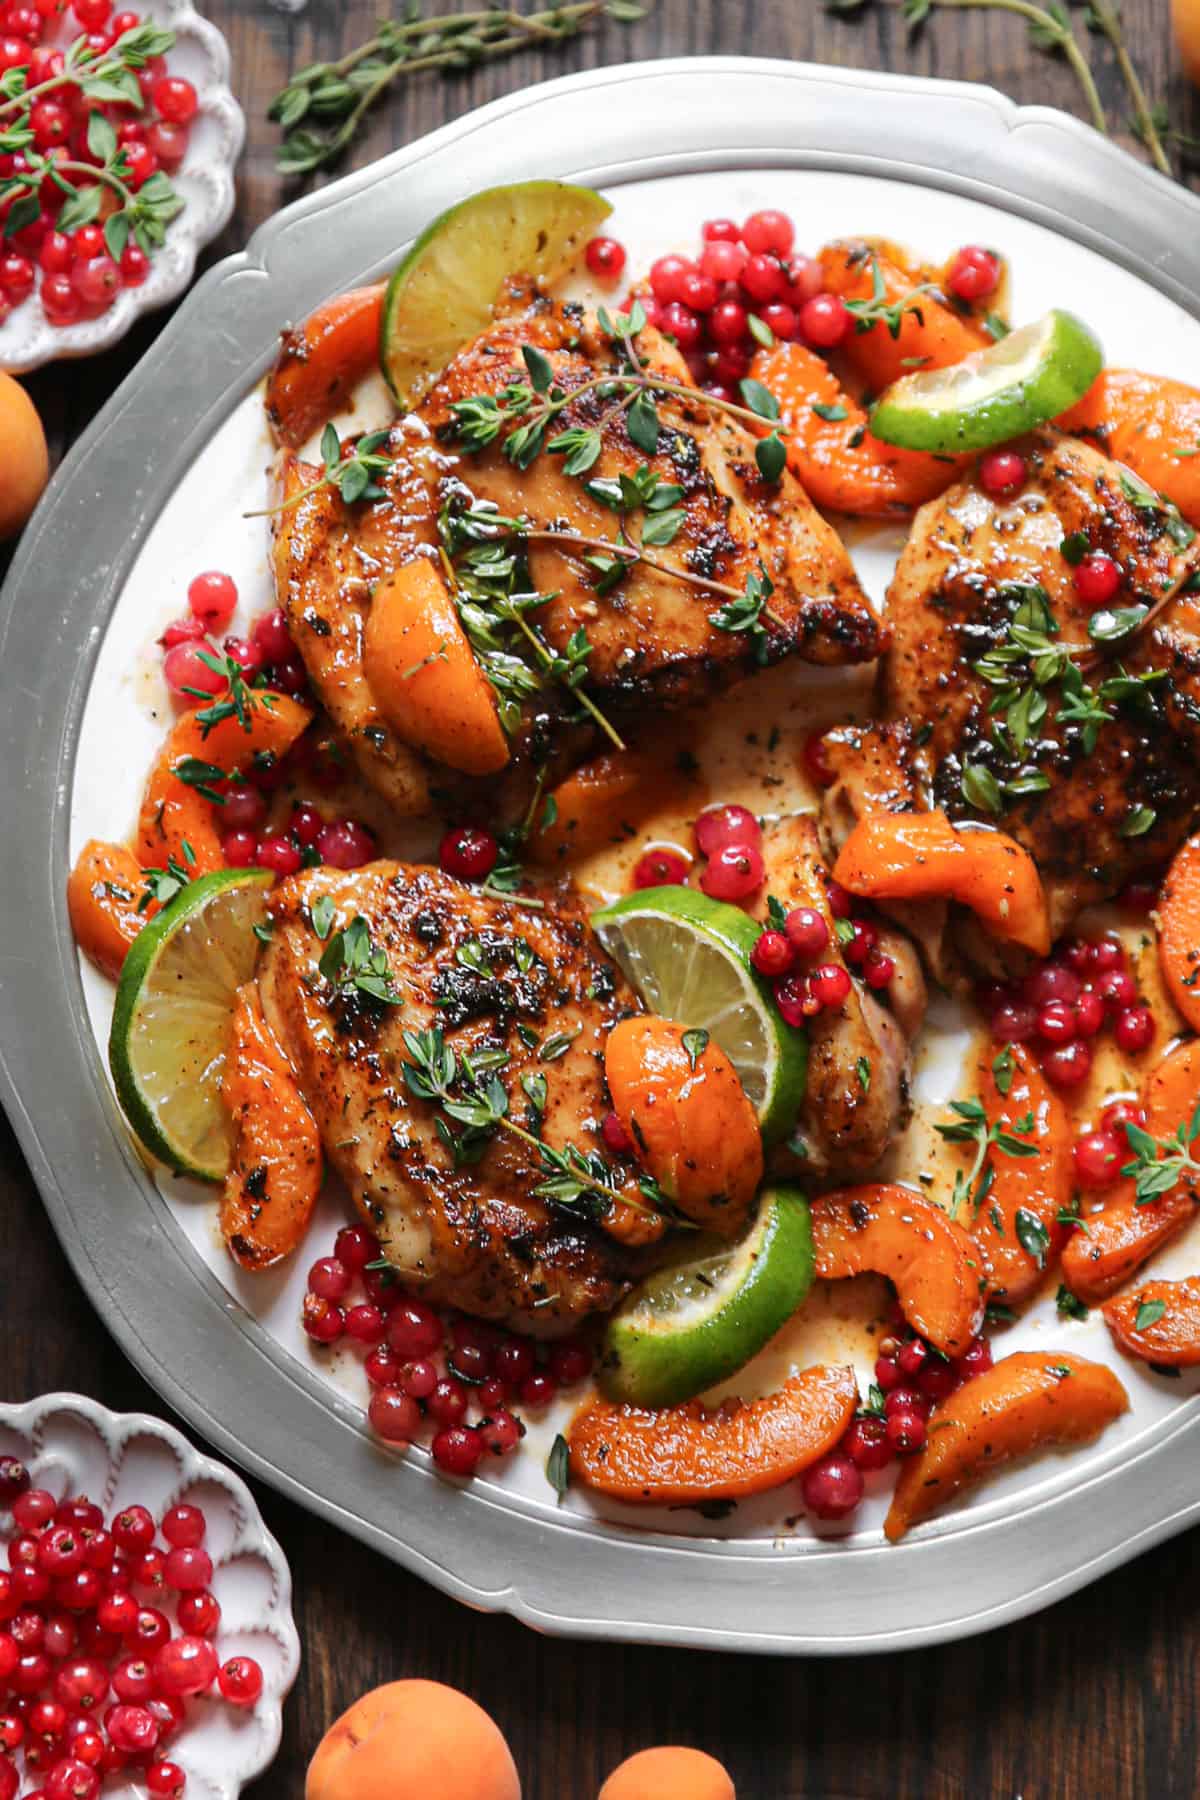 Seared Chicken Thighs with Red Currants, Apricots, Honey-Lime Sauce, garnished with lime slices - on a plate.